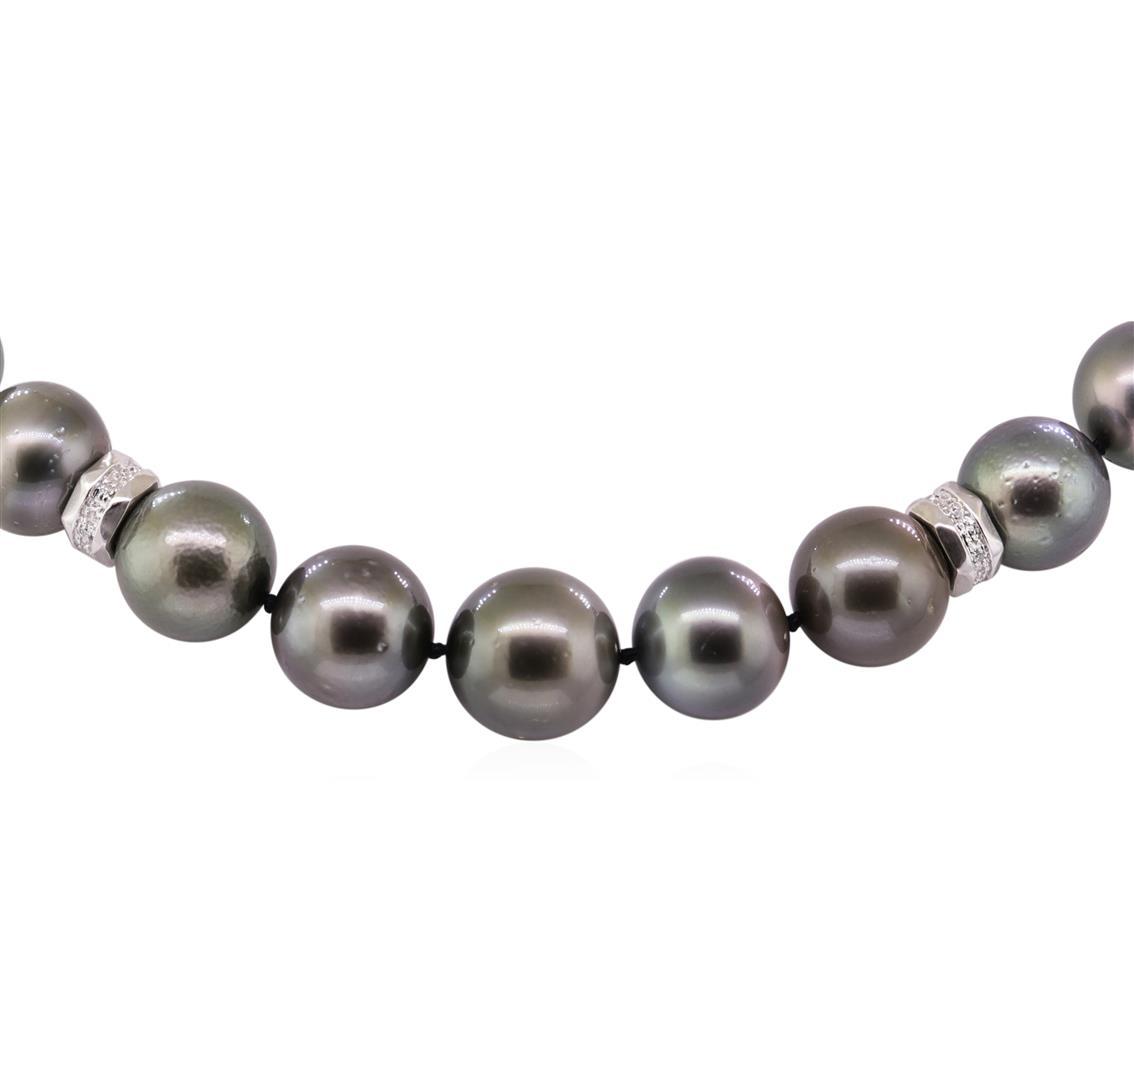 0.67 ctw Diamond and Tahitian Pearl Necklace - 14KT White Gold